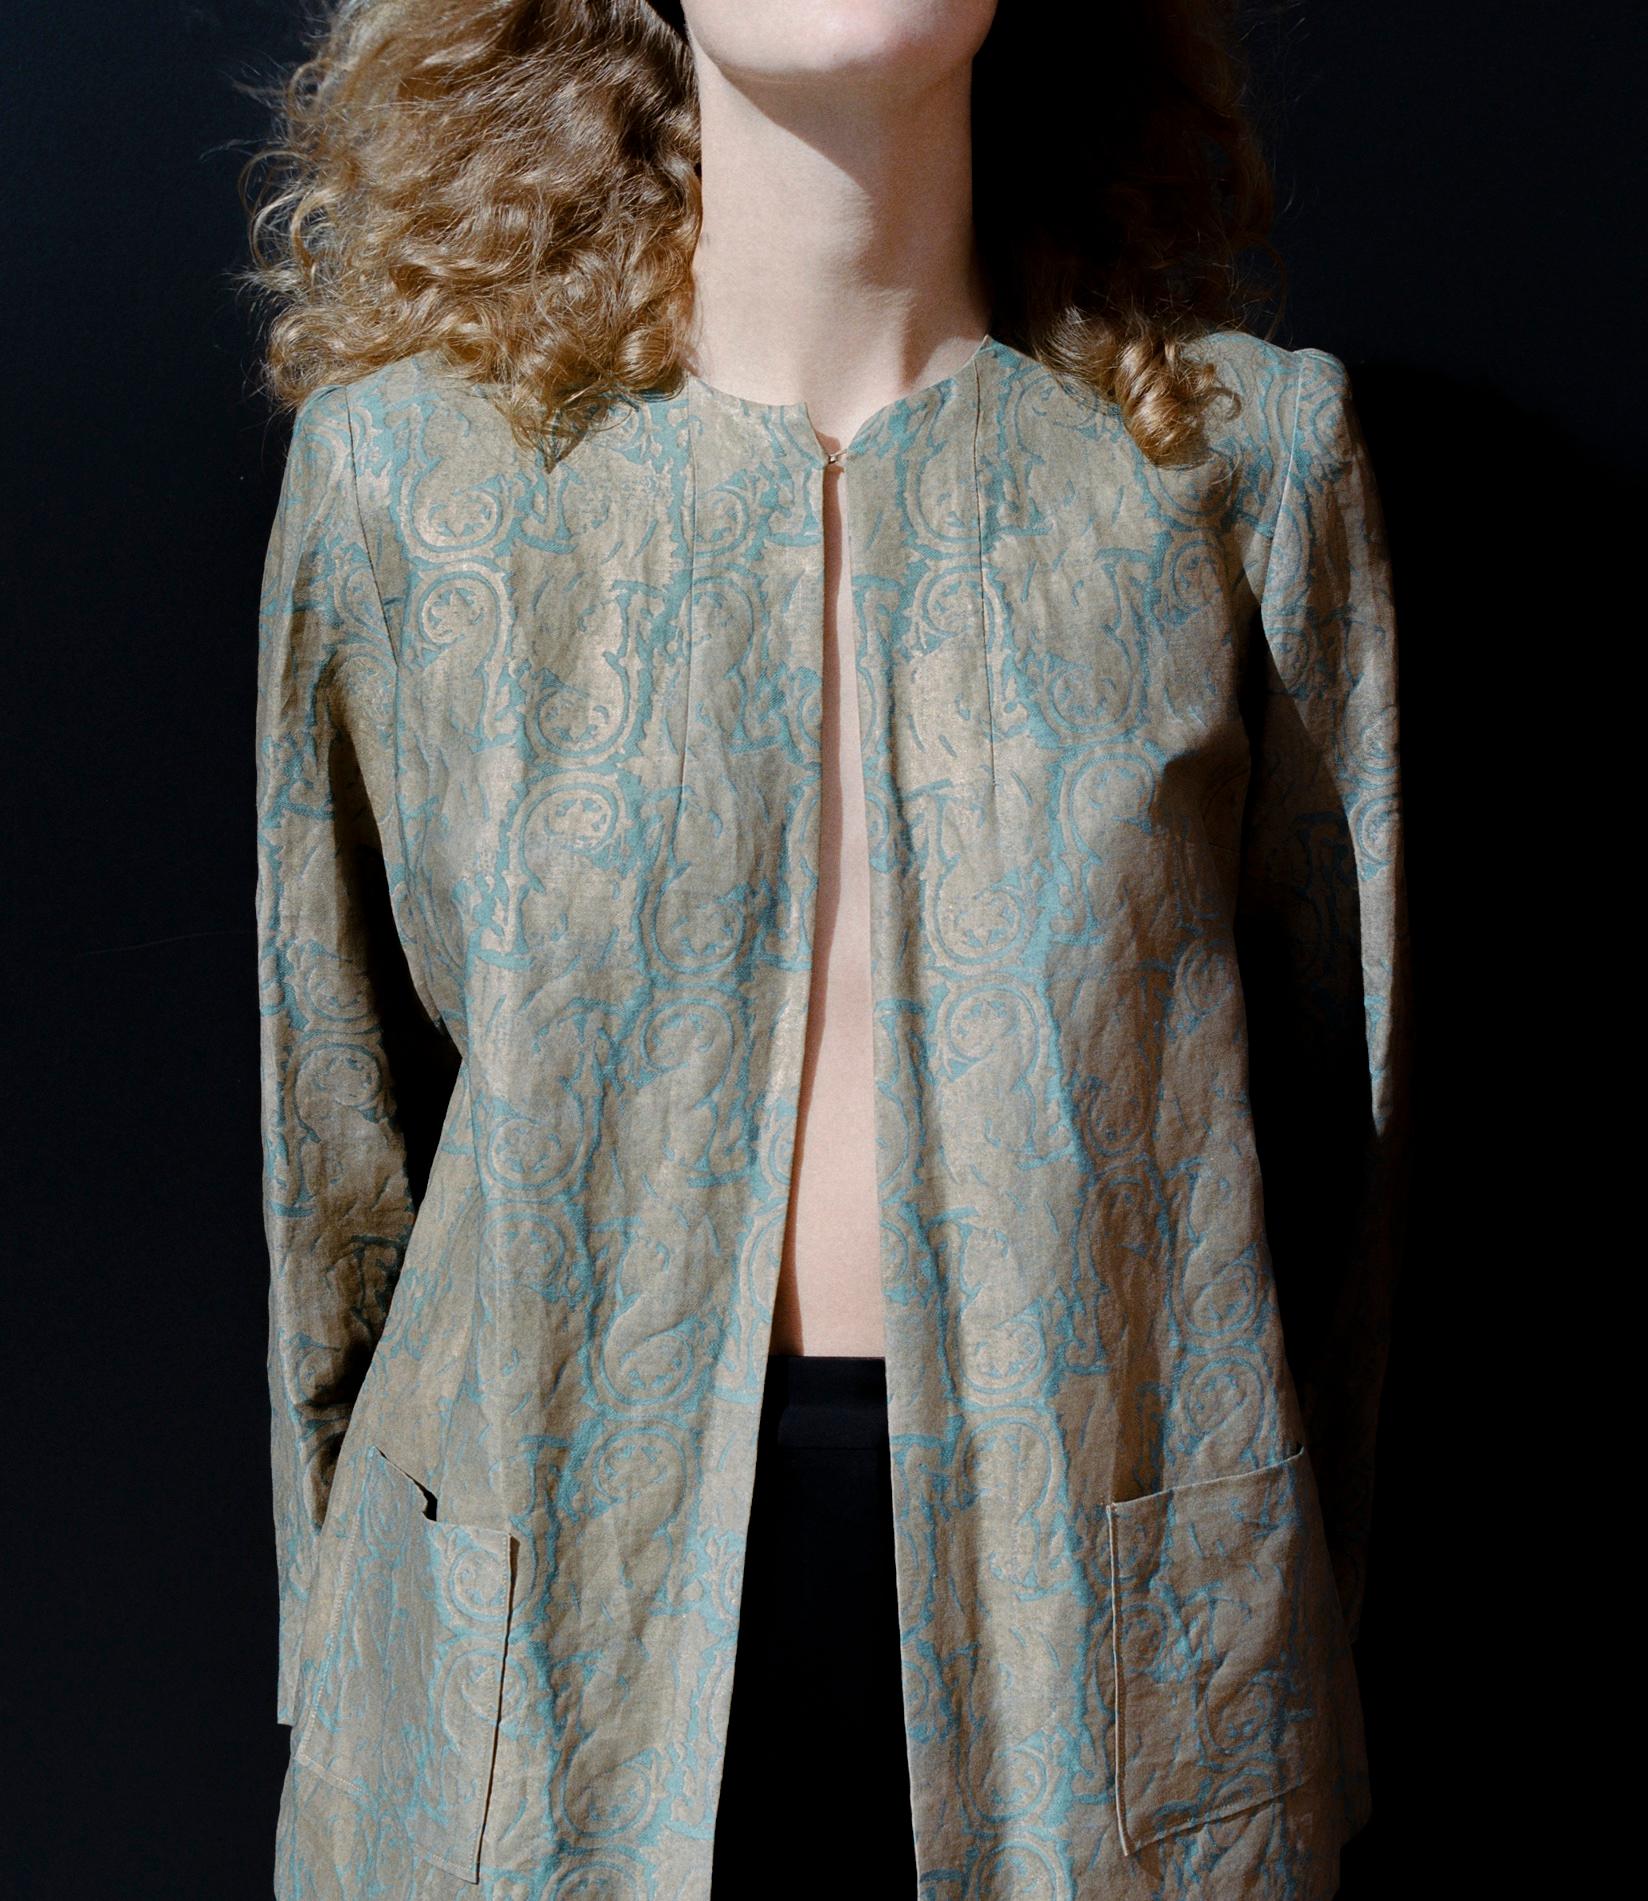 1940’s Mariano Fortuny burnished gold and teal cotton sateen stenciled evening jacket, linked in silk. Excellent Vintage Condition.
Shoulder: 15″
Bust: 40″
Sleeve: 21″
Length: 26″